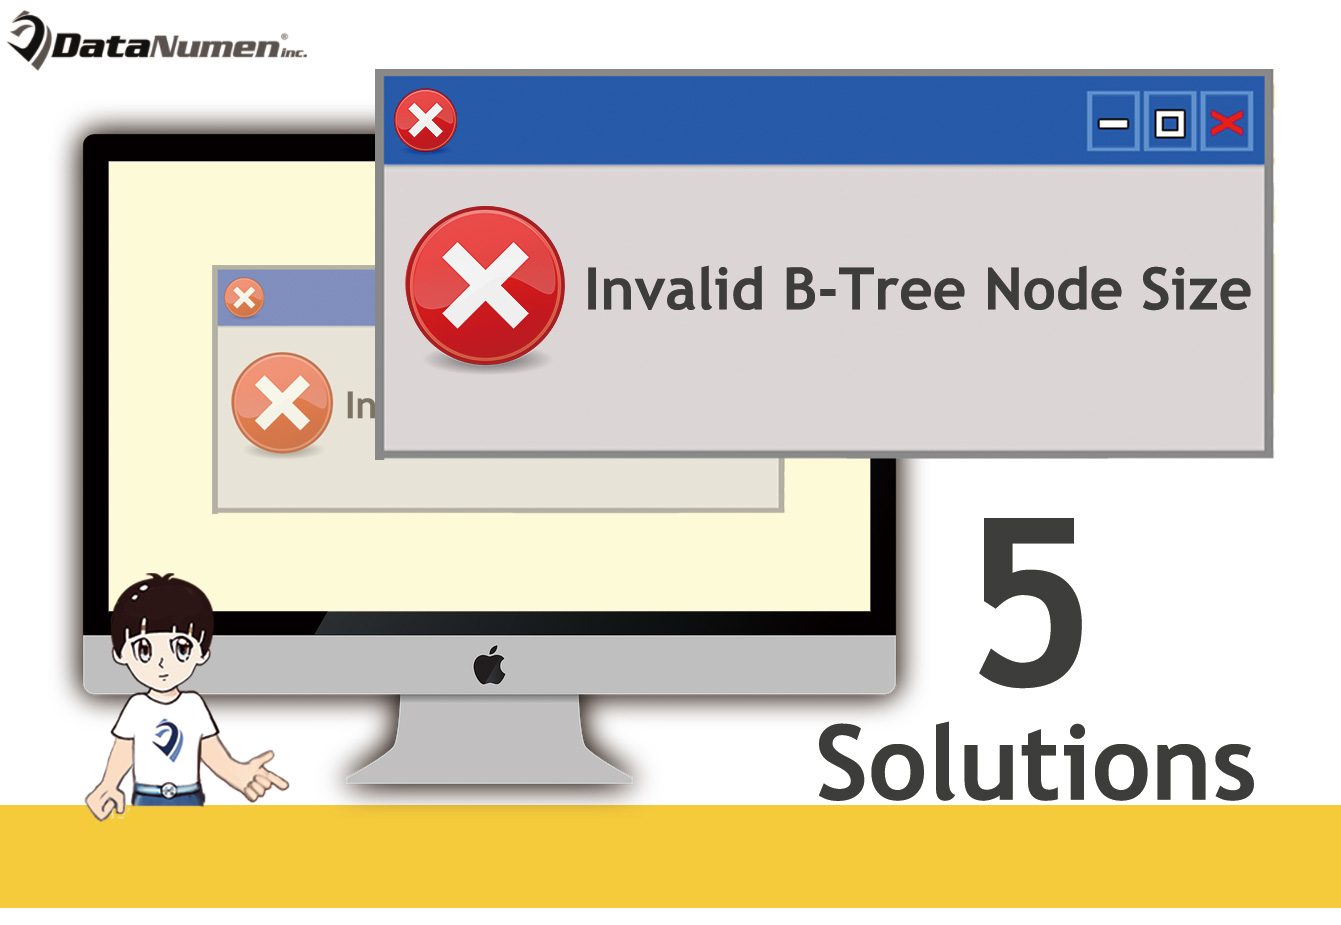 5 Solutions to "Invalid B-Tree Node Size" Error on Mac System